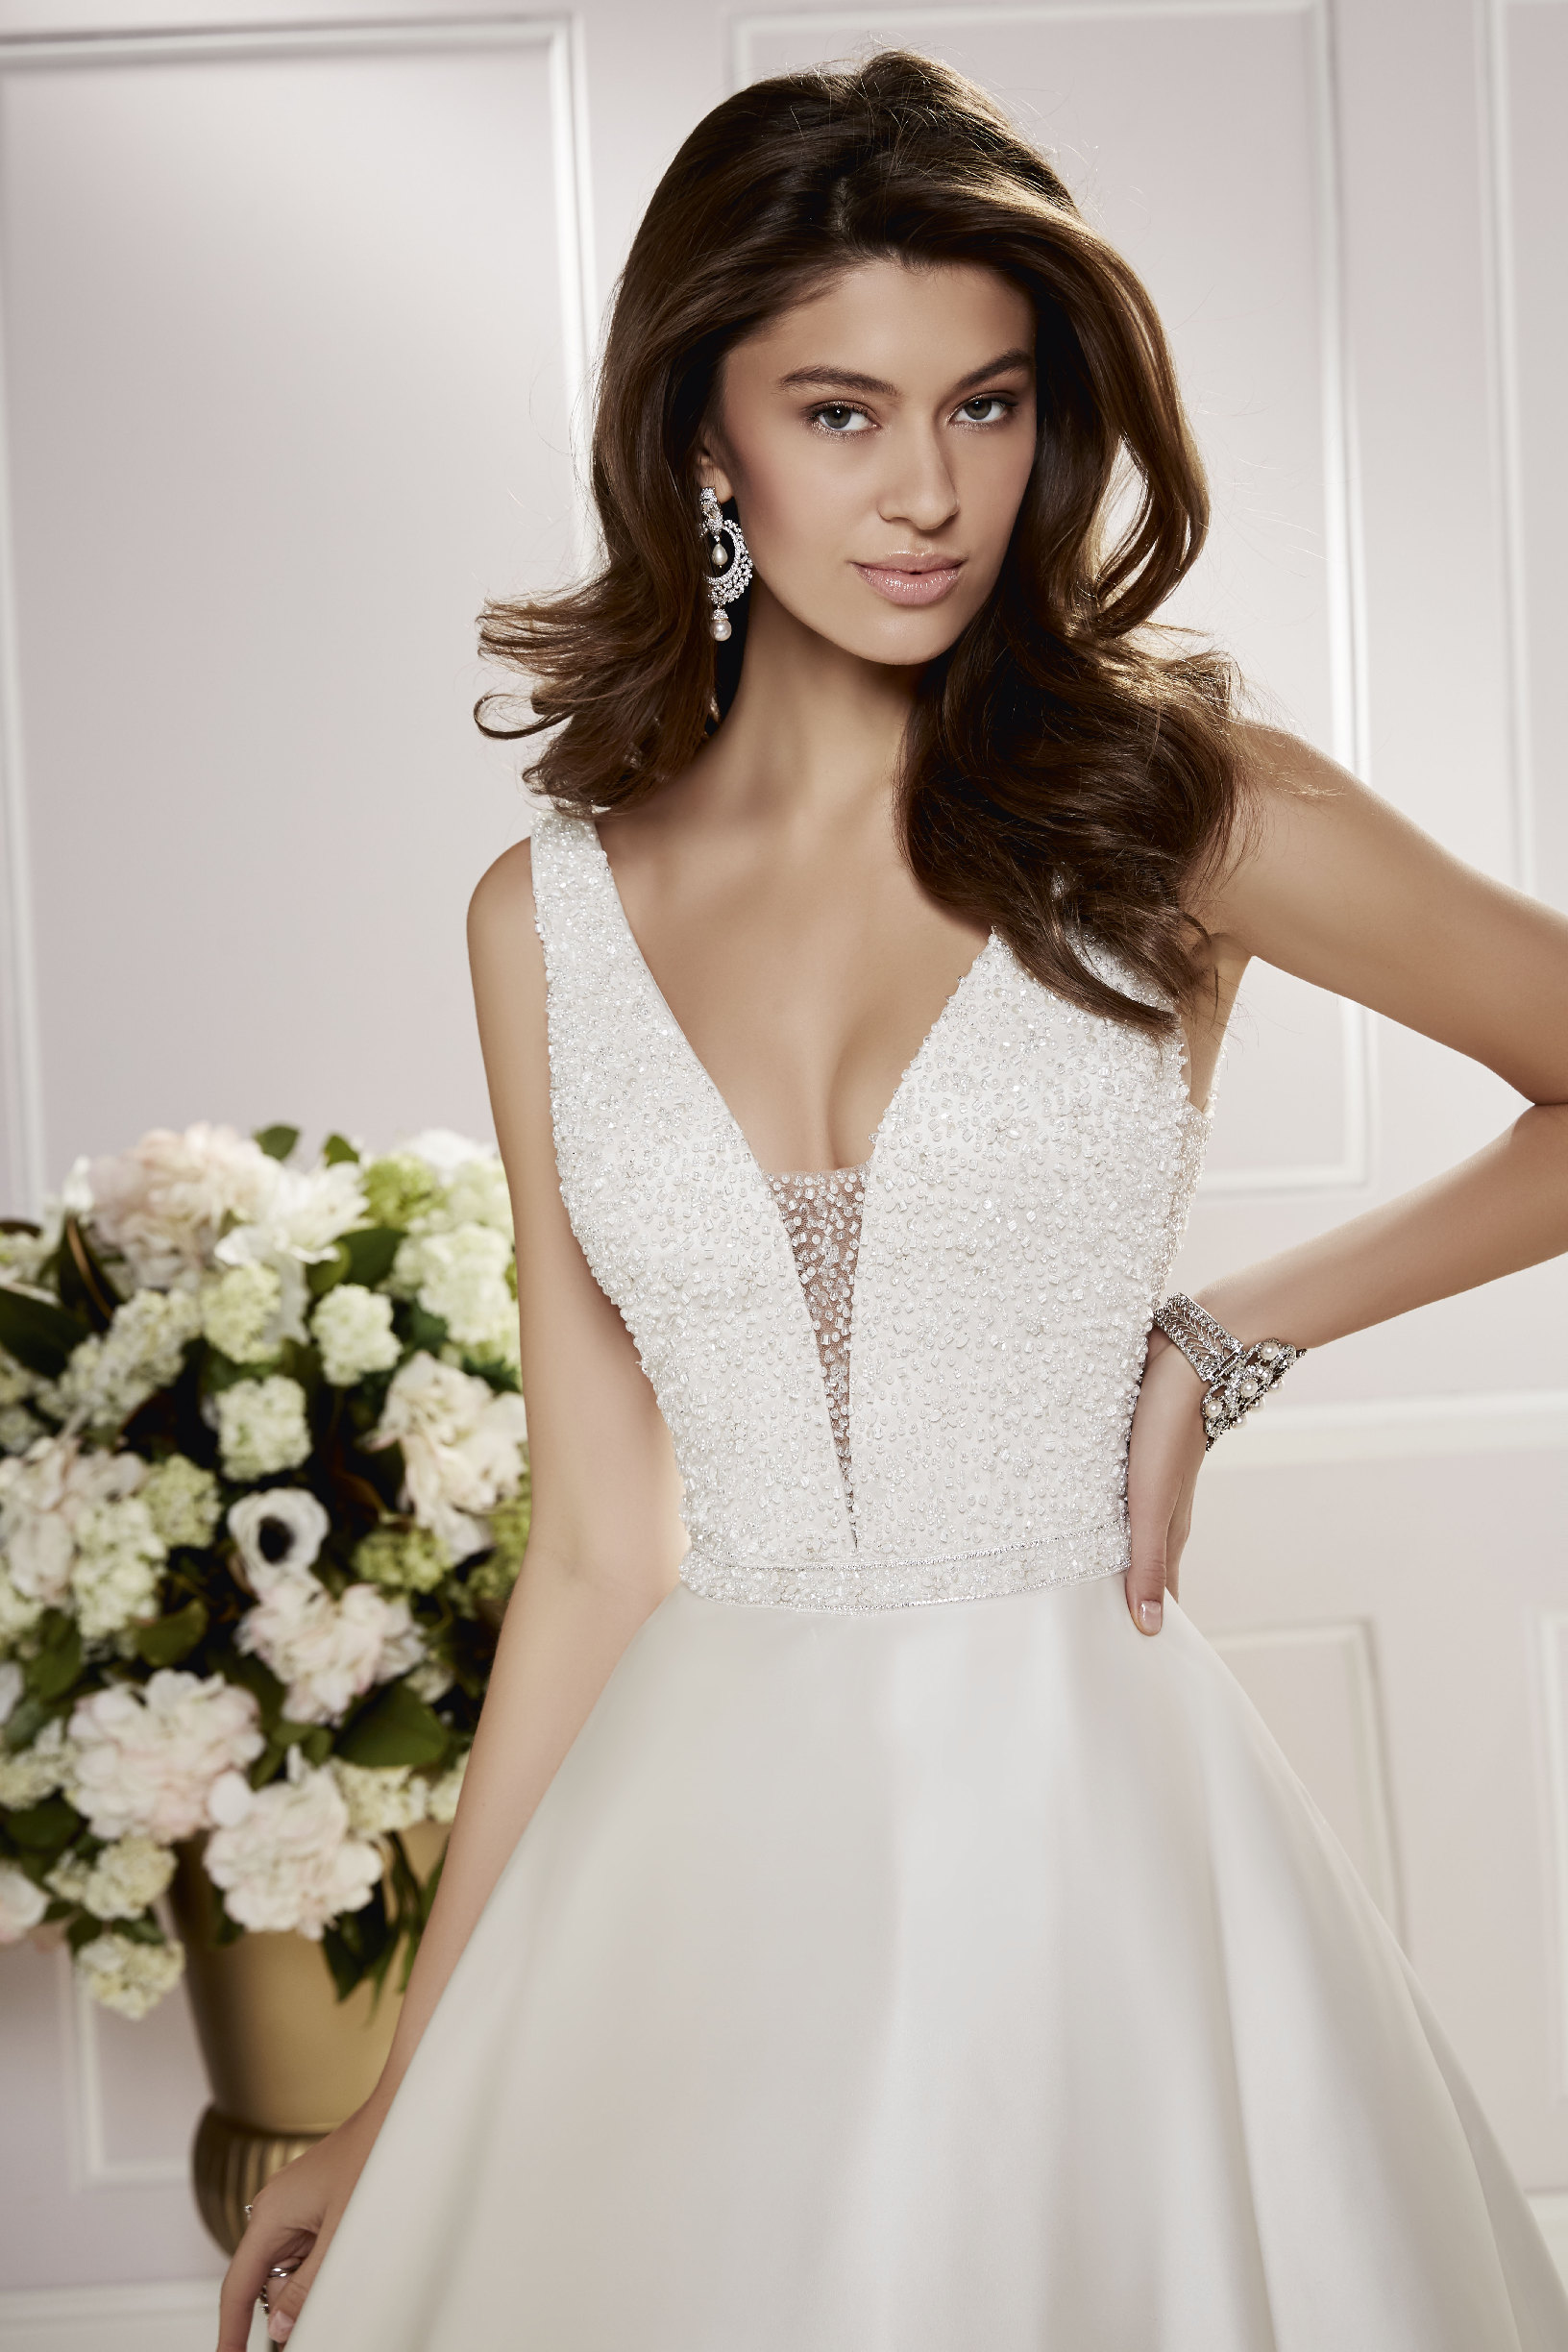 Brunette model in Ronald Joyce wedding dress 69466, a classic v-neck A-line gown with a beaded bodice and satin skirt that's perfect if you need a wedding dress quickly.